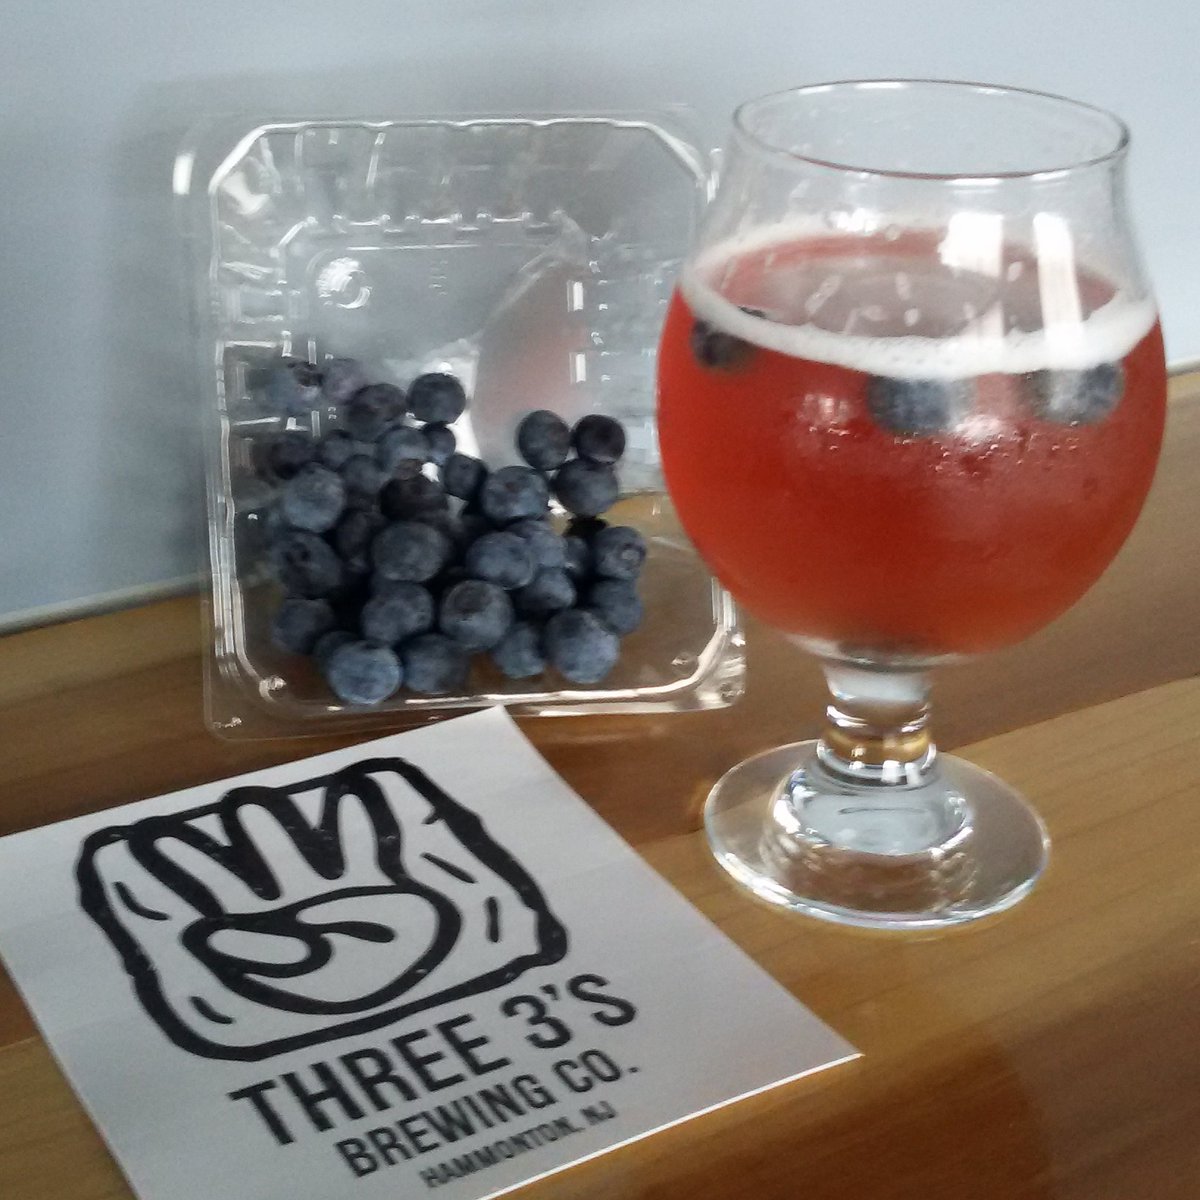 Its time to try our Blueberry Saison!  Made with 124 lbs of blueberries plus we'll add a few to your glass! #drinklocal #blueberrybeer #njcb